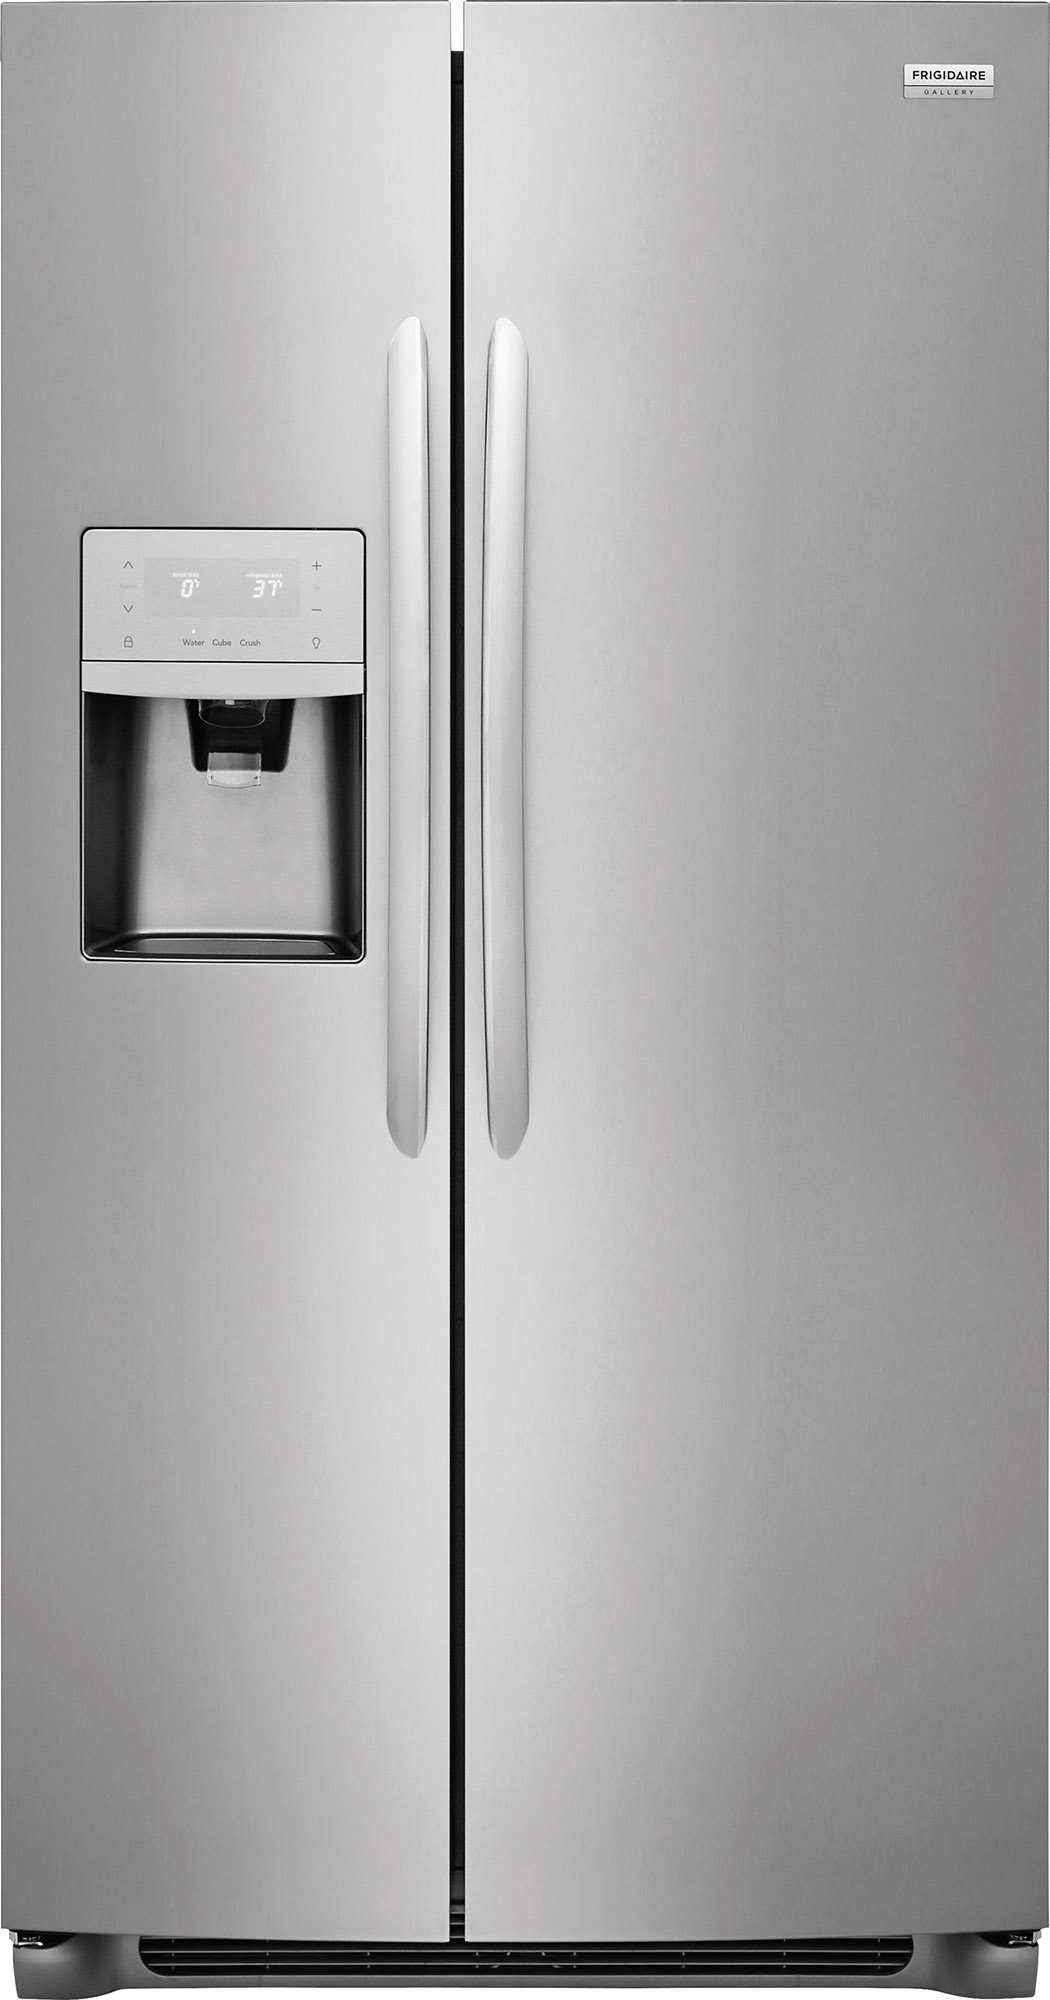 Frigidaire Gallery® 25.5 Cu. Ft. Stainless Steel Side-By-Side Refrigerator